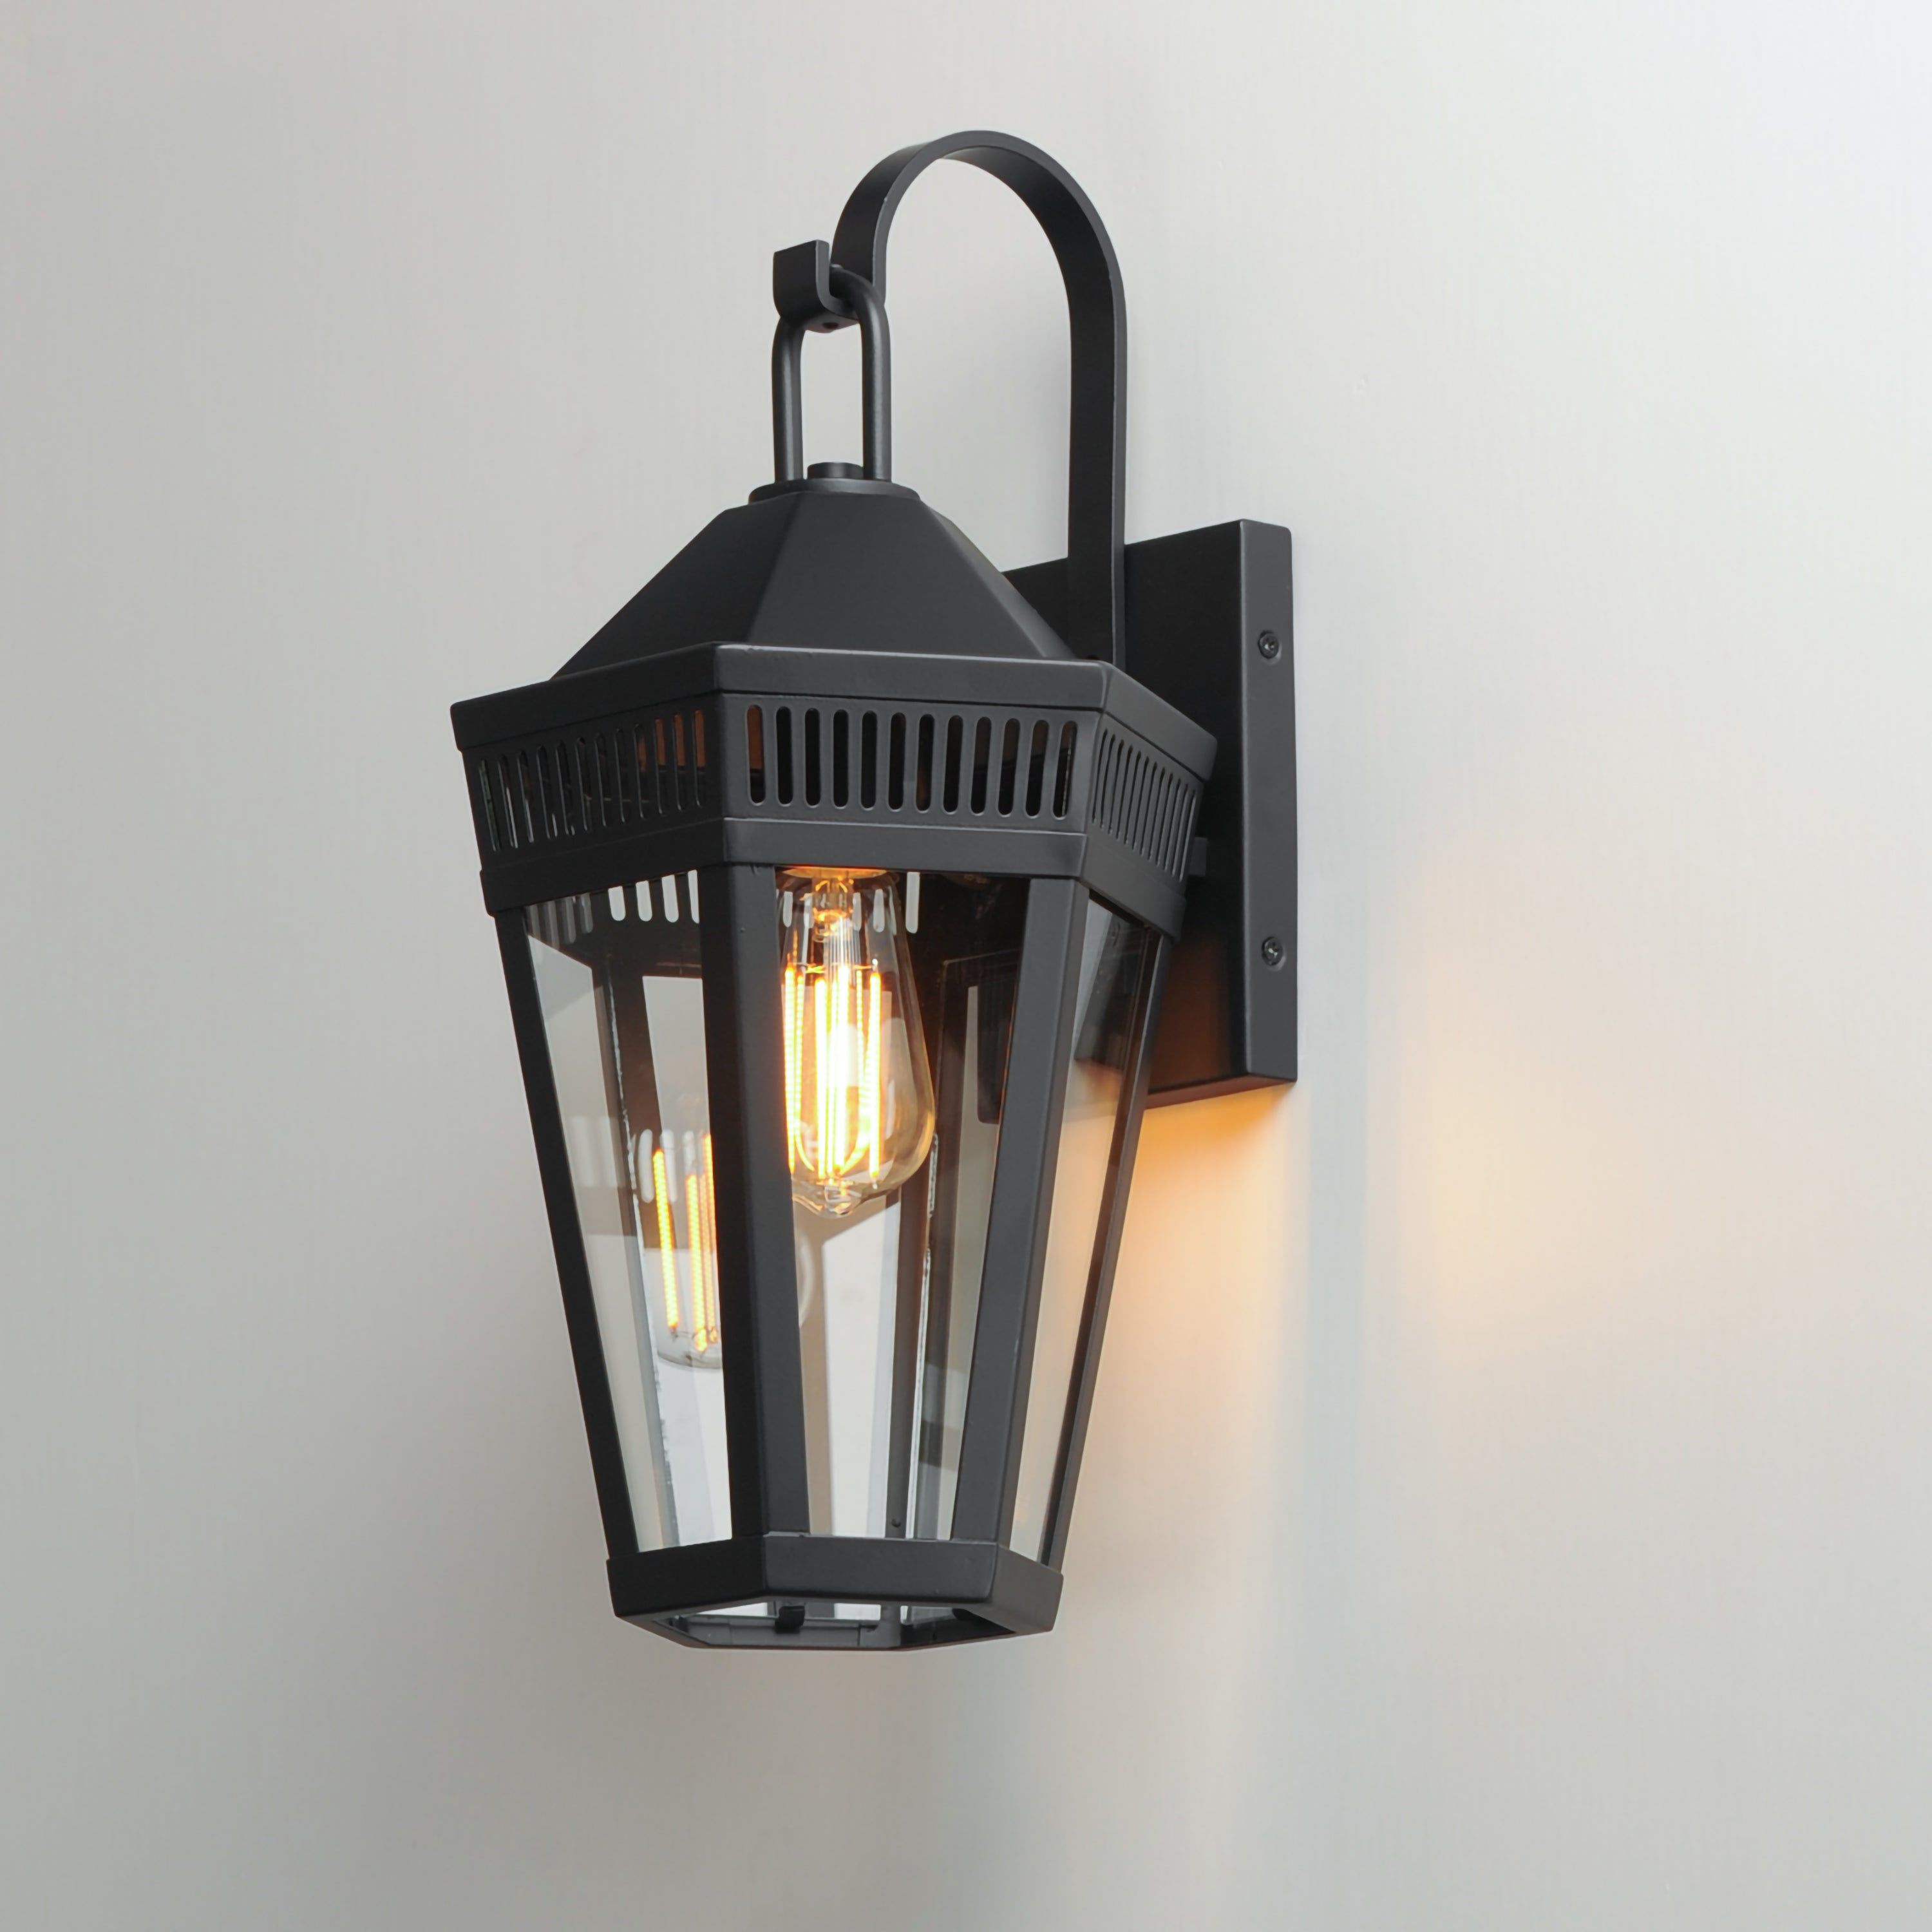 Oxford Outdoor 1-Light Large Wall Sconce